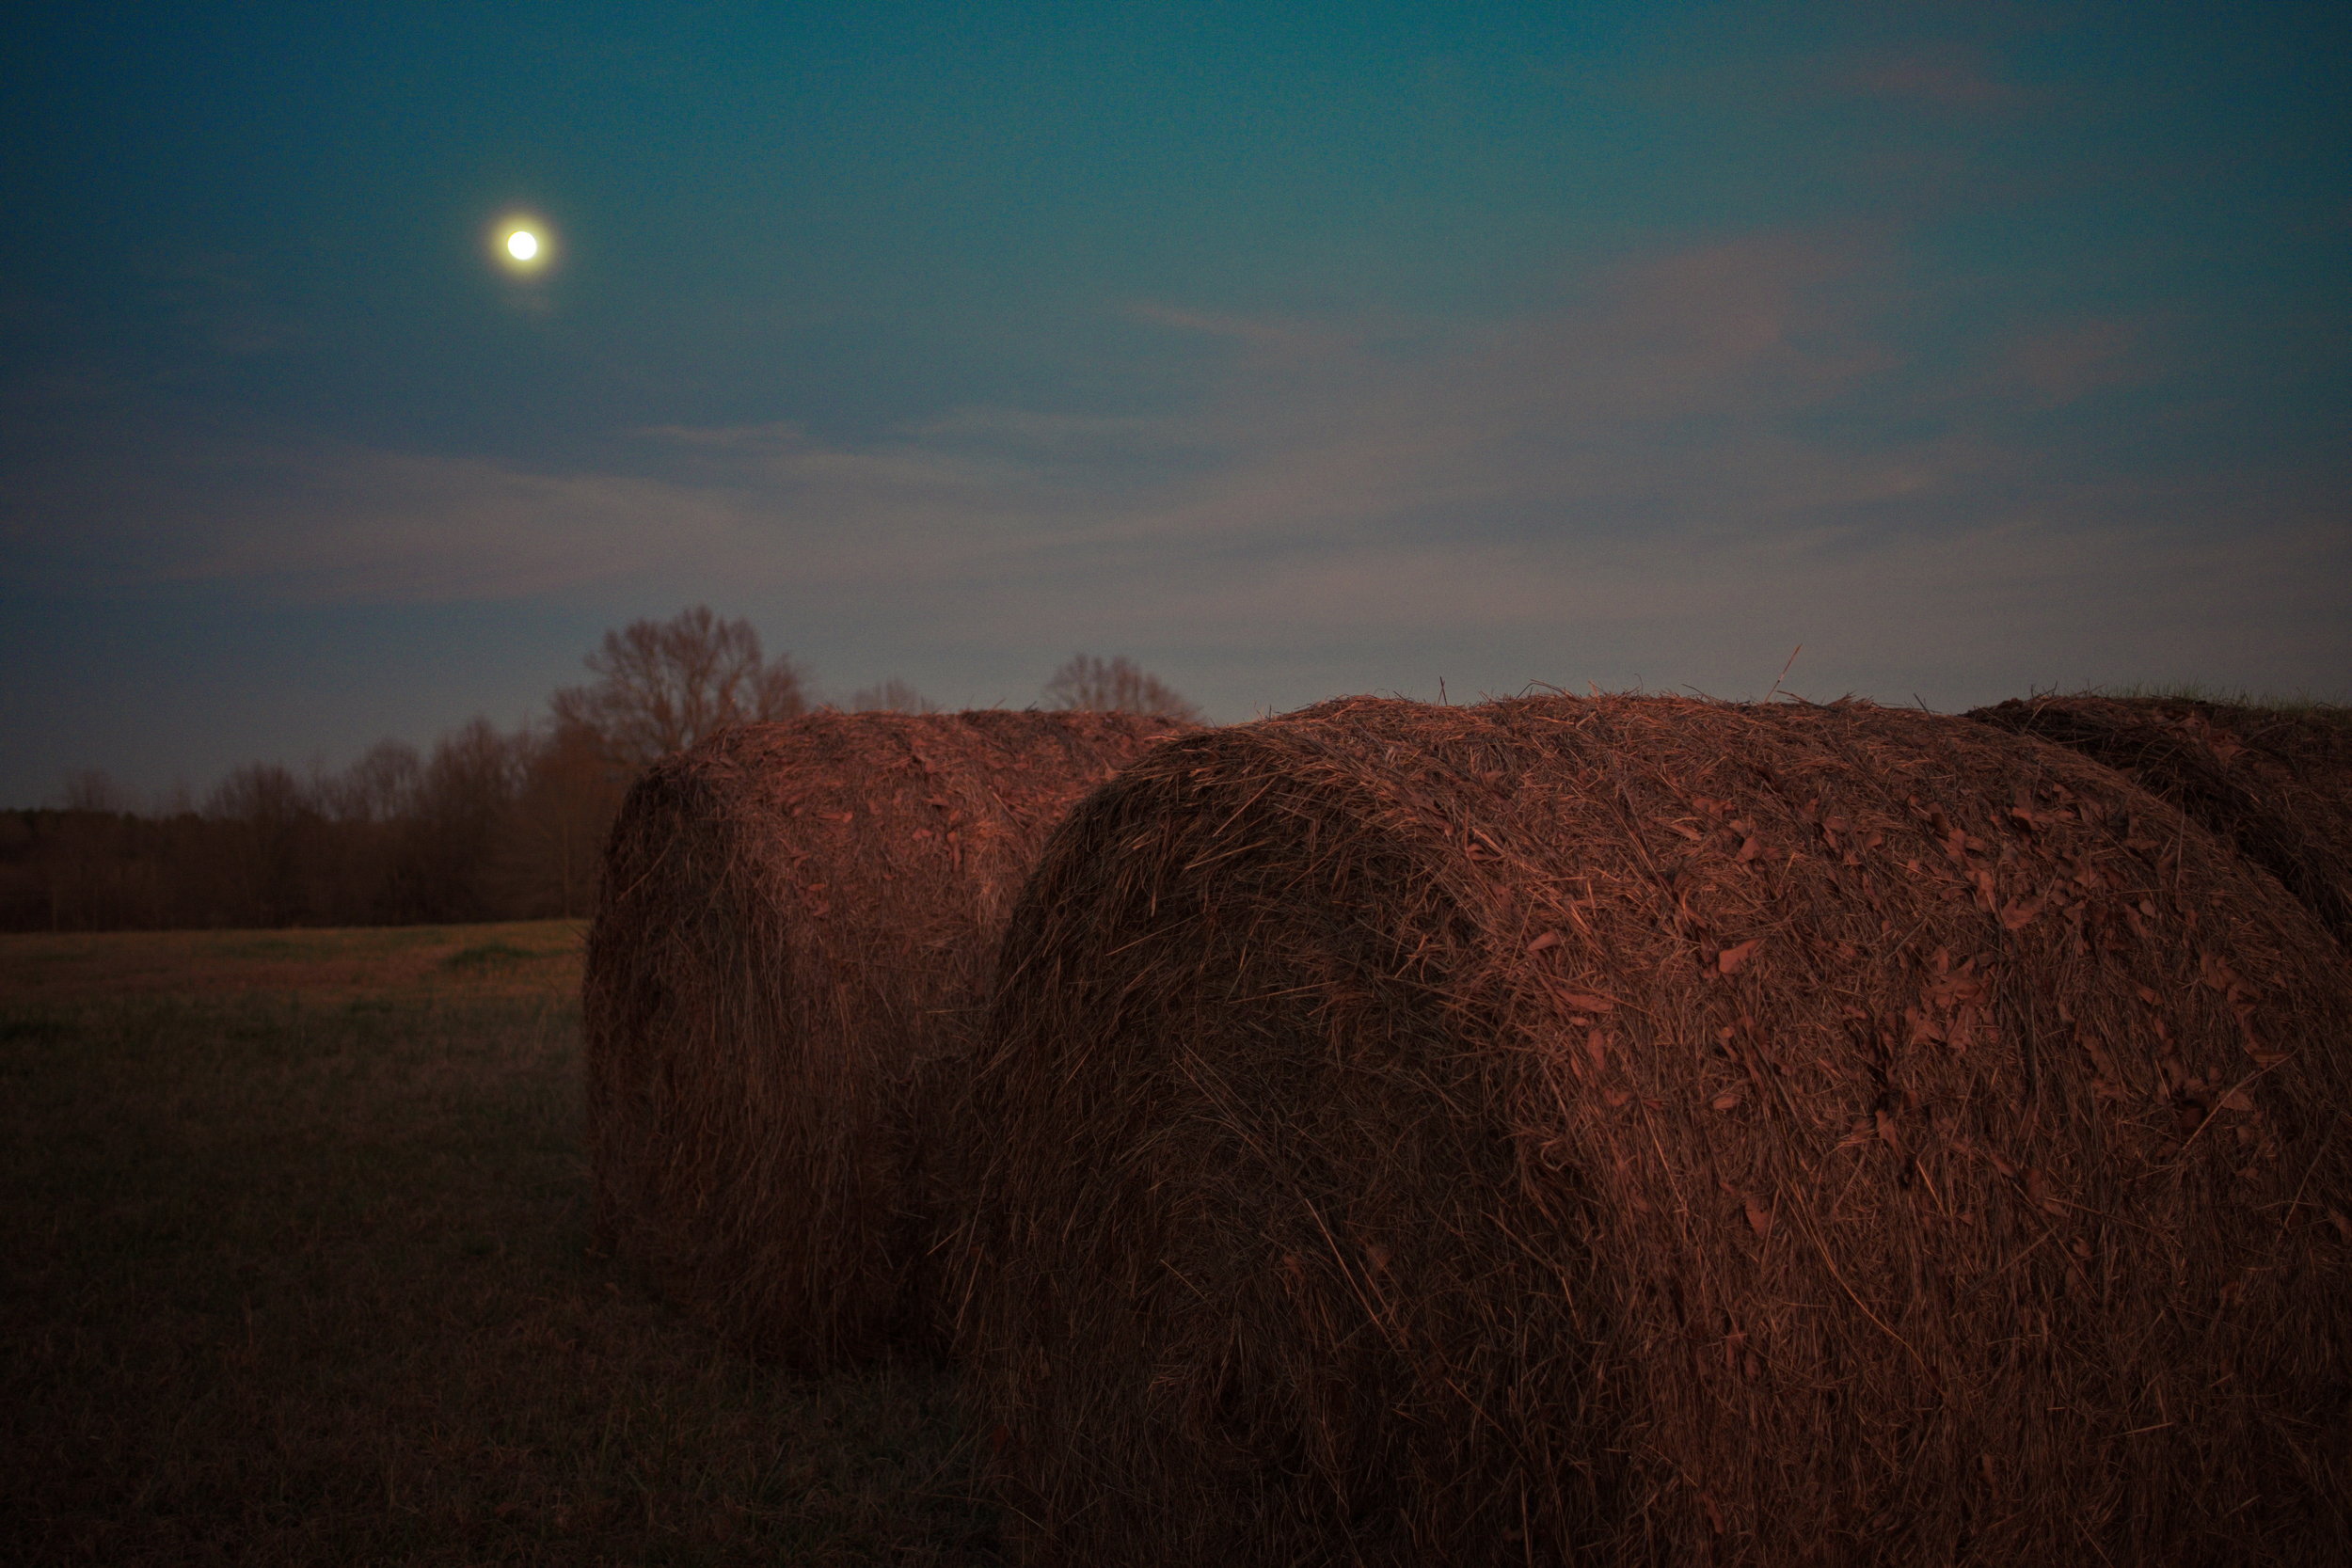  Full moon rising over hay bales along Highway 32 just west of U.S. Highway 51 